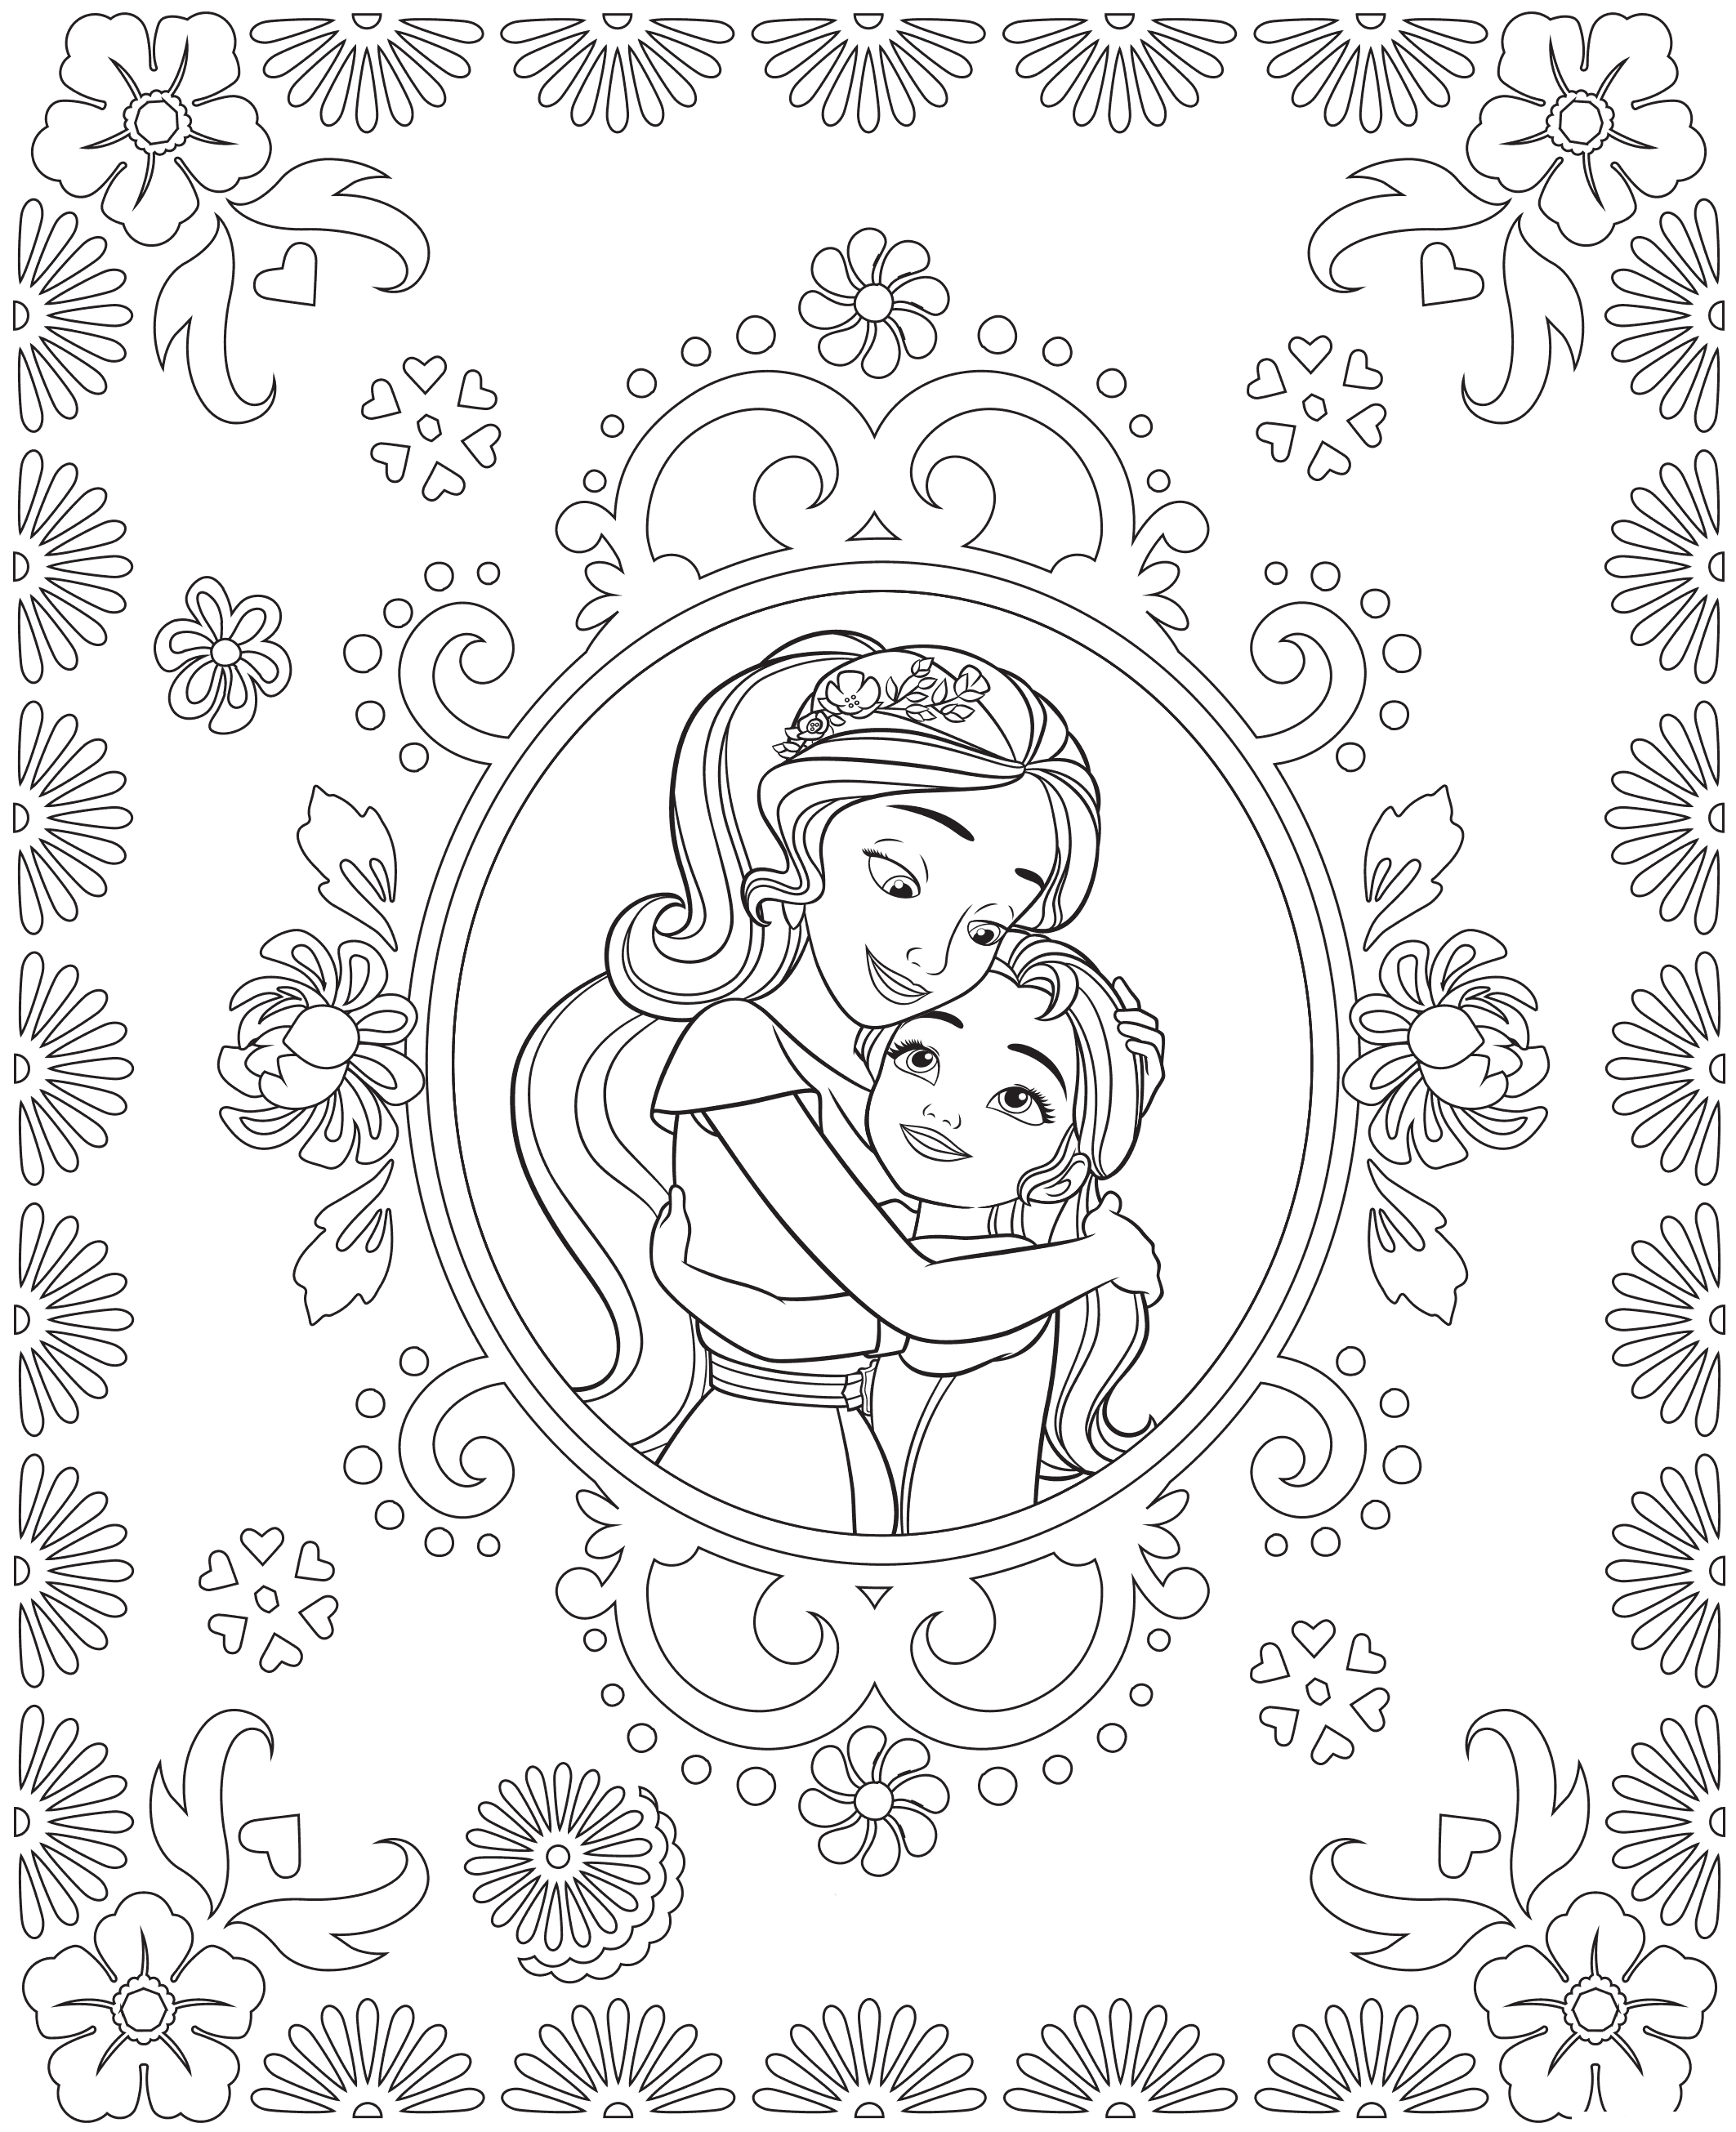 Elena of Avalor Coloring Pages   Best Coloring Pages For Kids